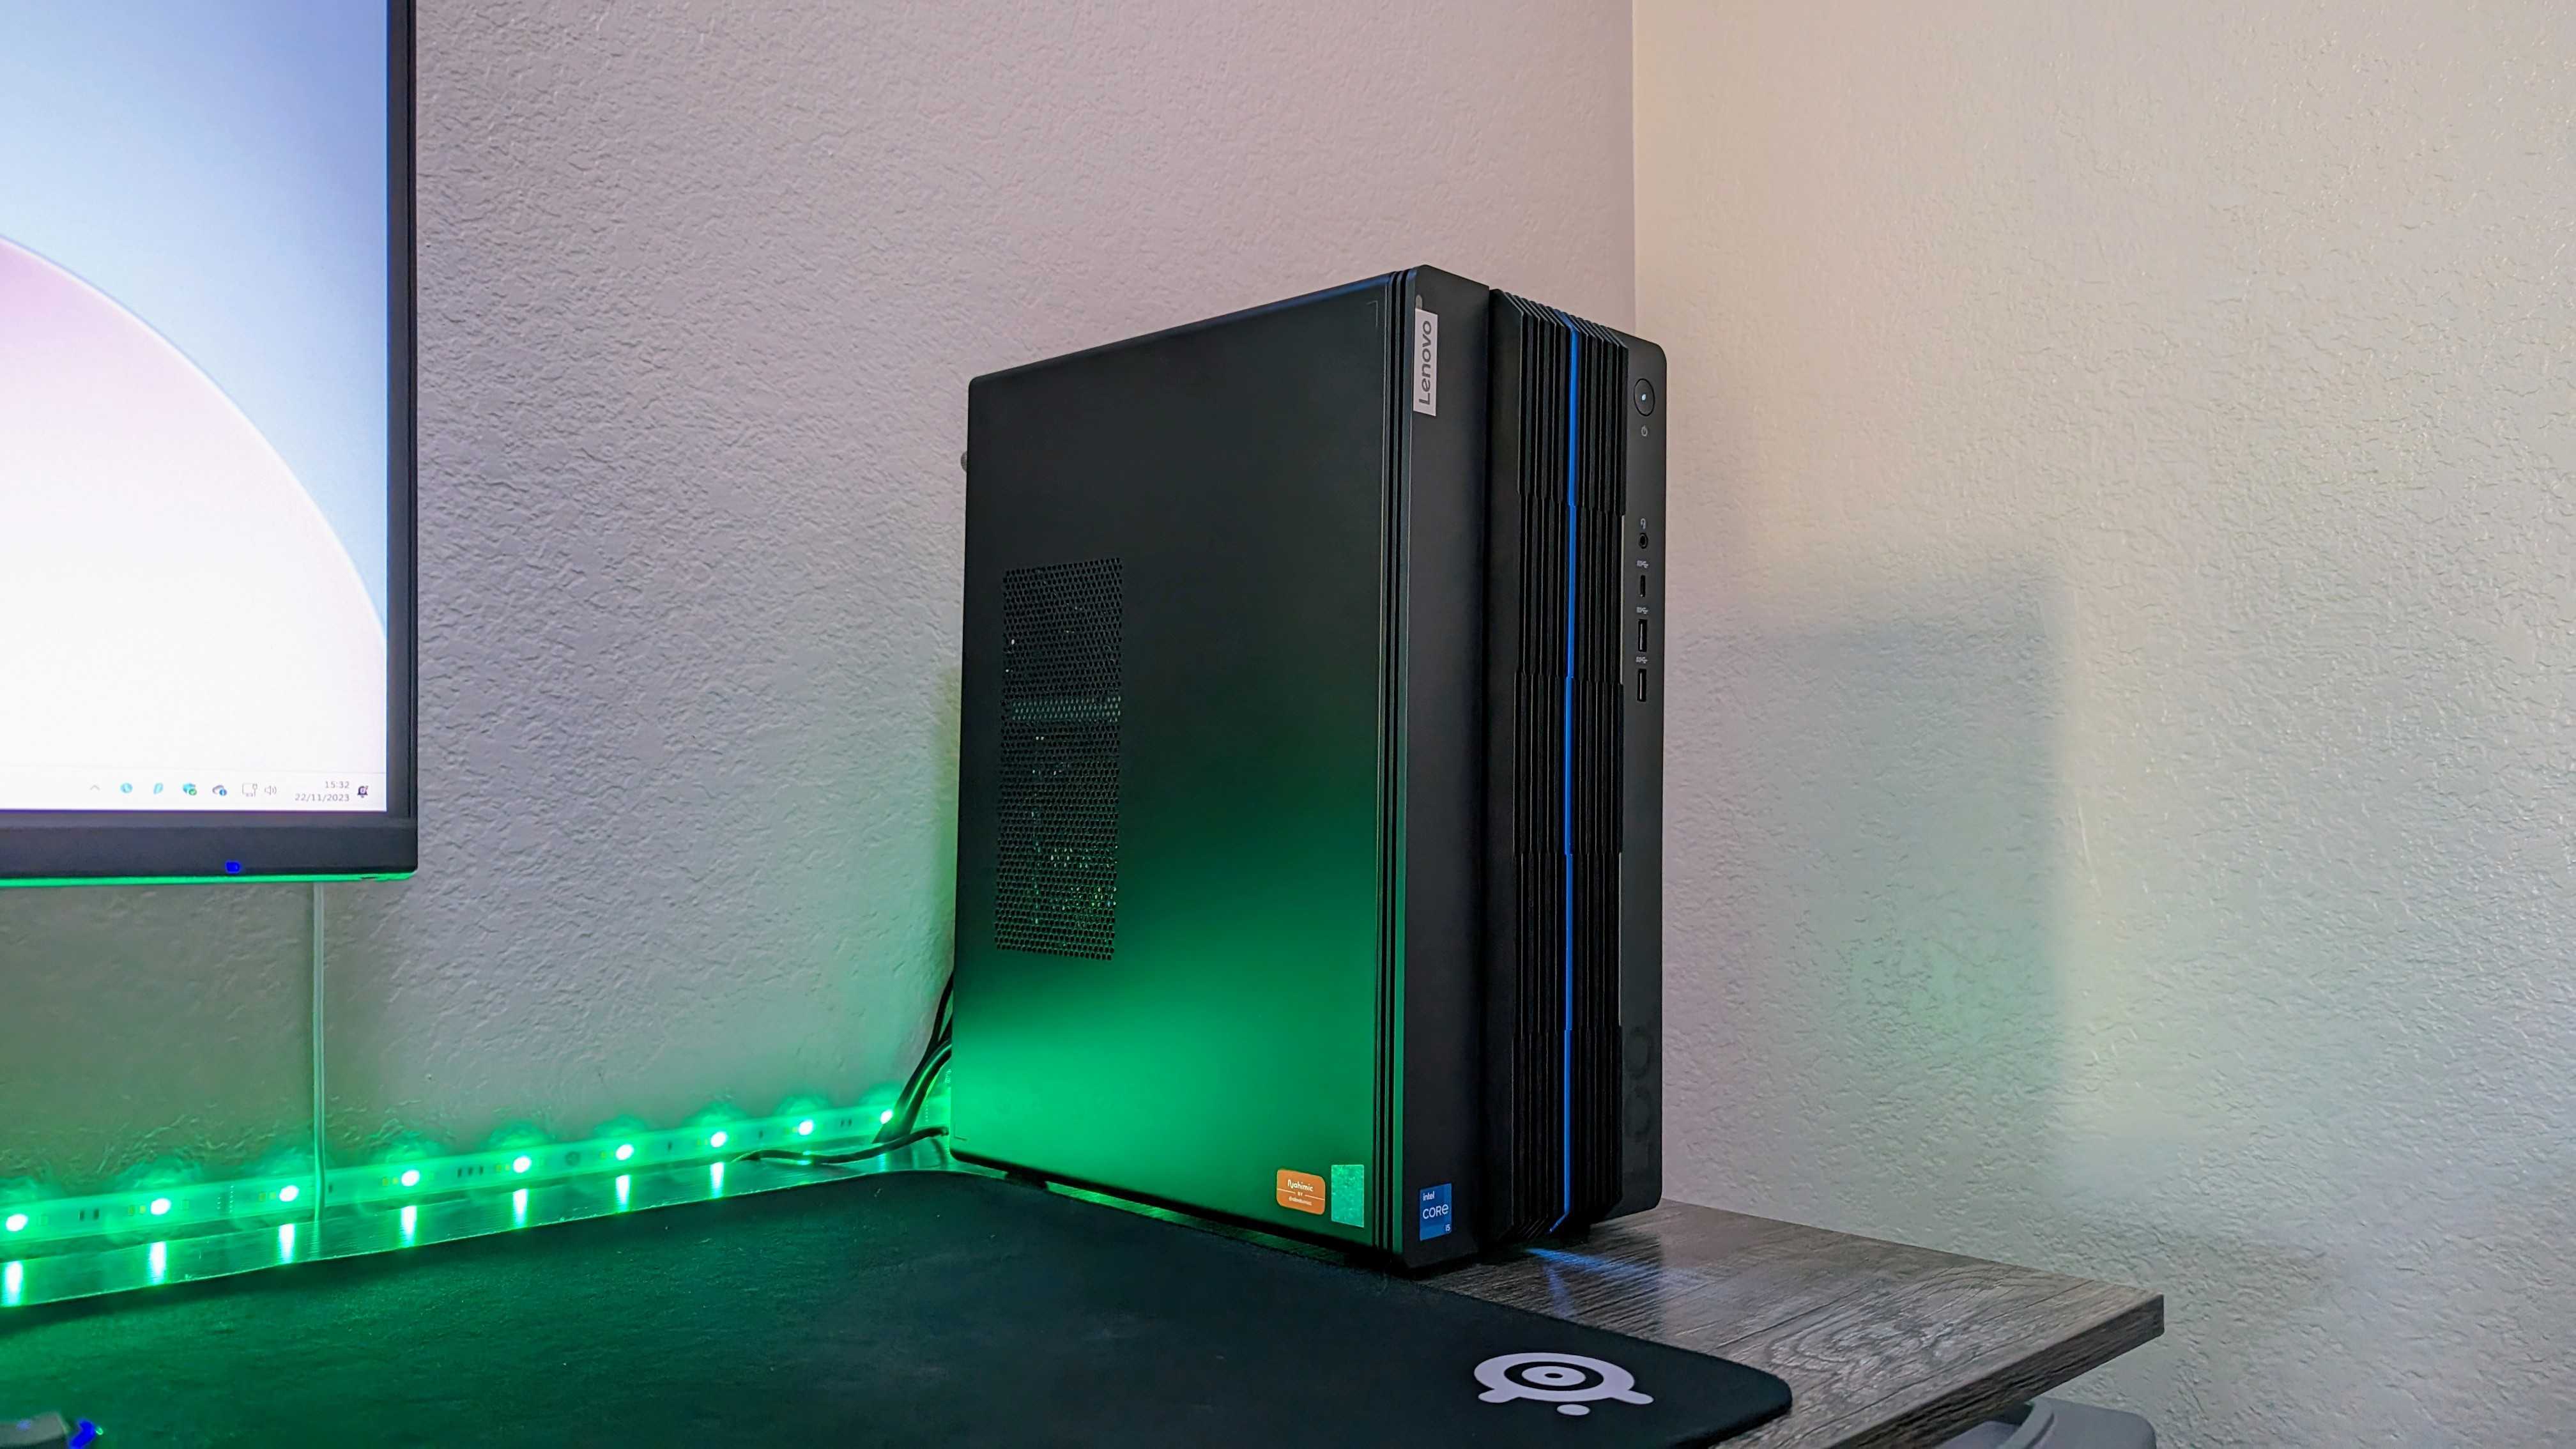 Review: The Lenovo LOQ Tower is a great, compact 1080p gaming desktop